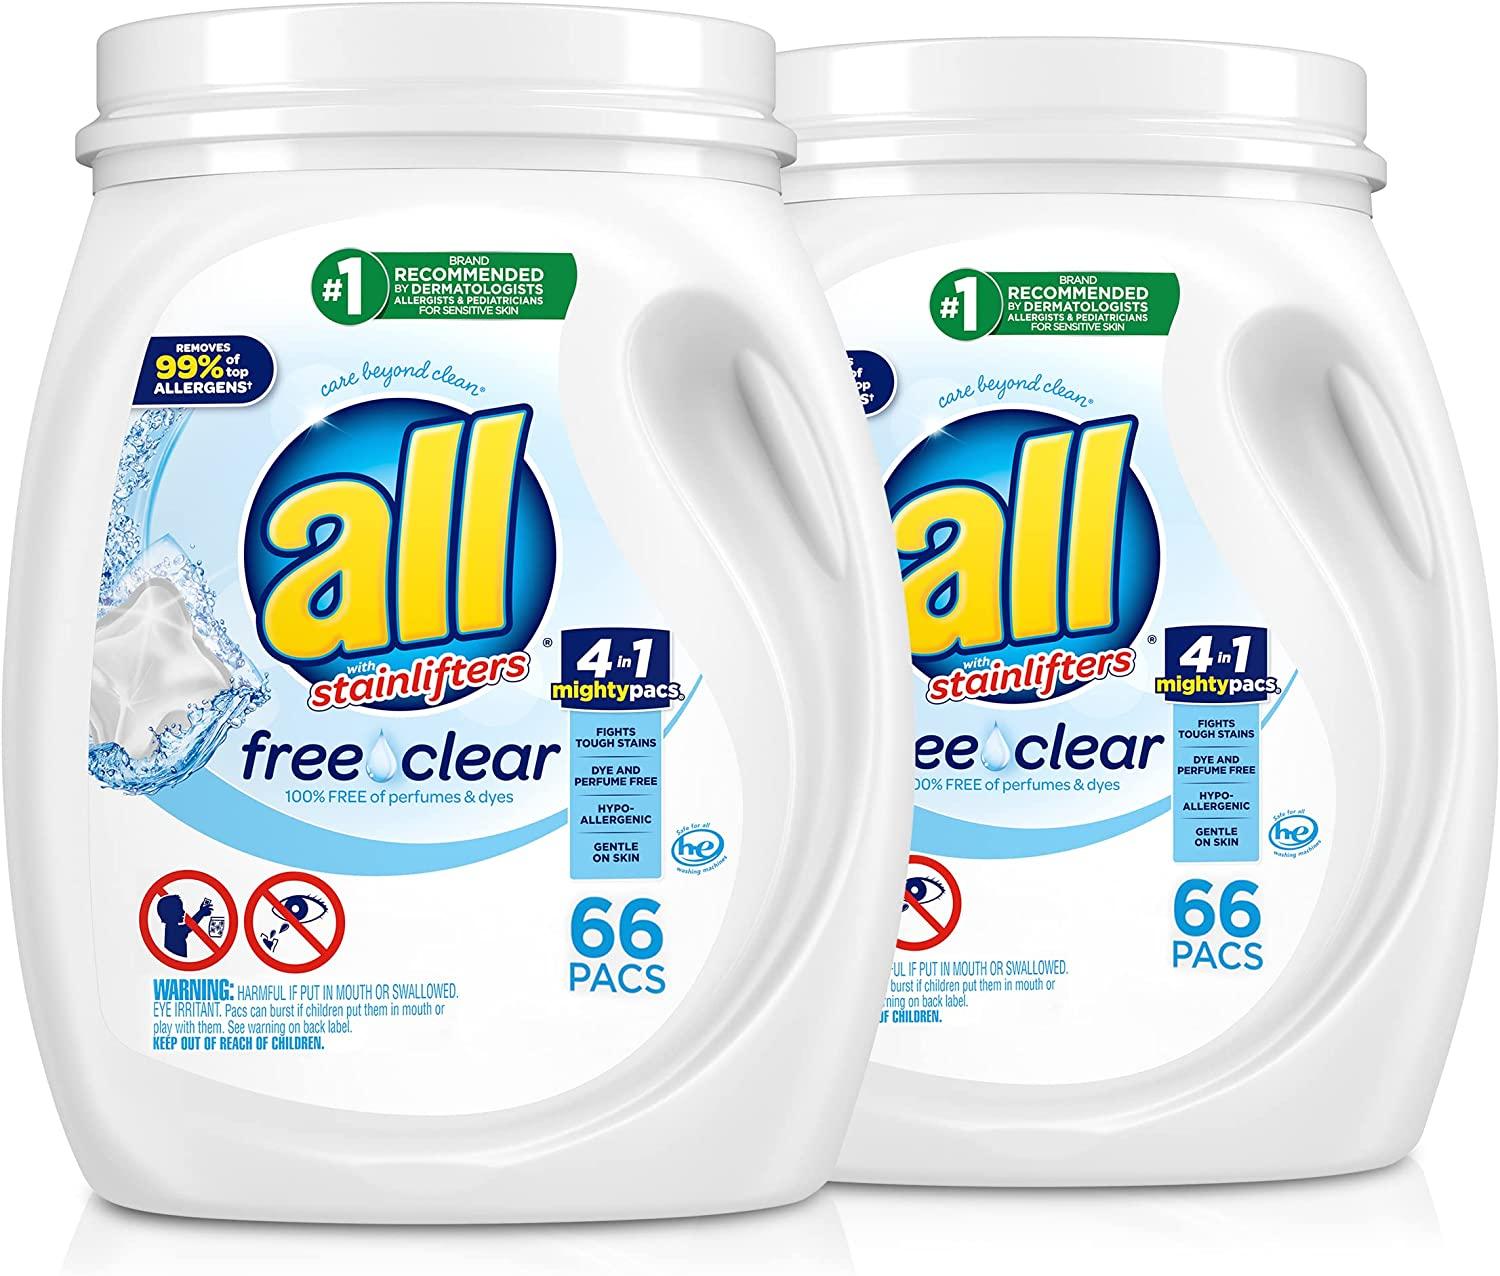 2 All Mighty Pacs with Stainlifters Laundry Detergent for $14.81 Shipped